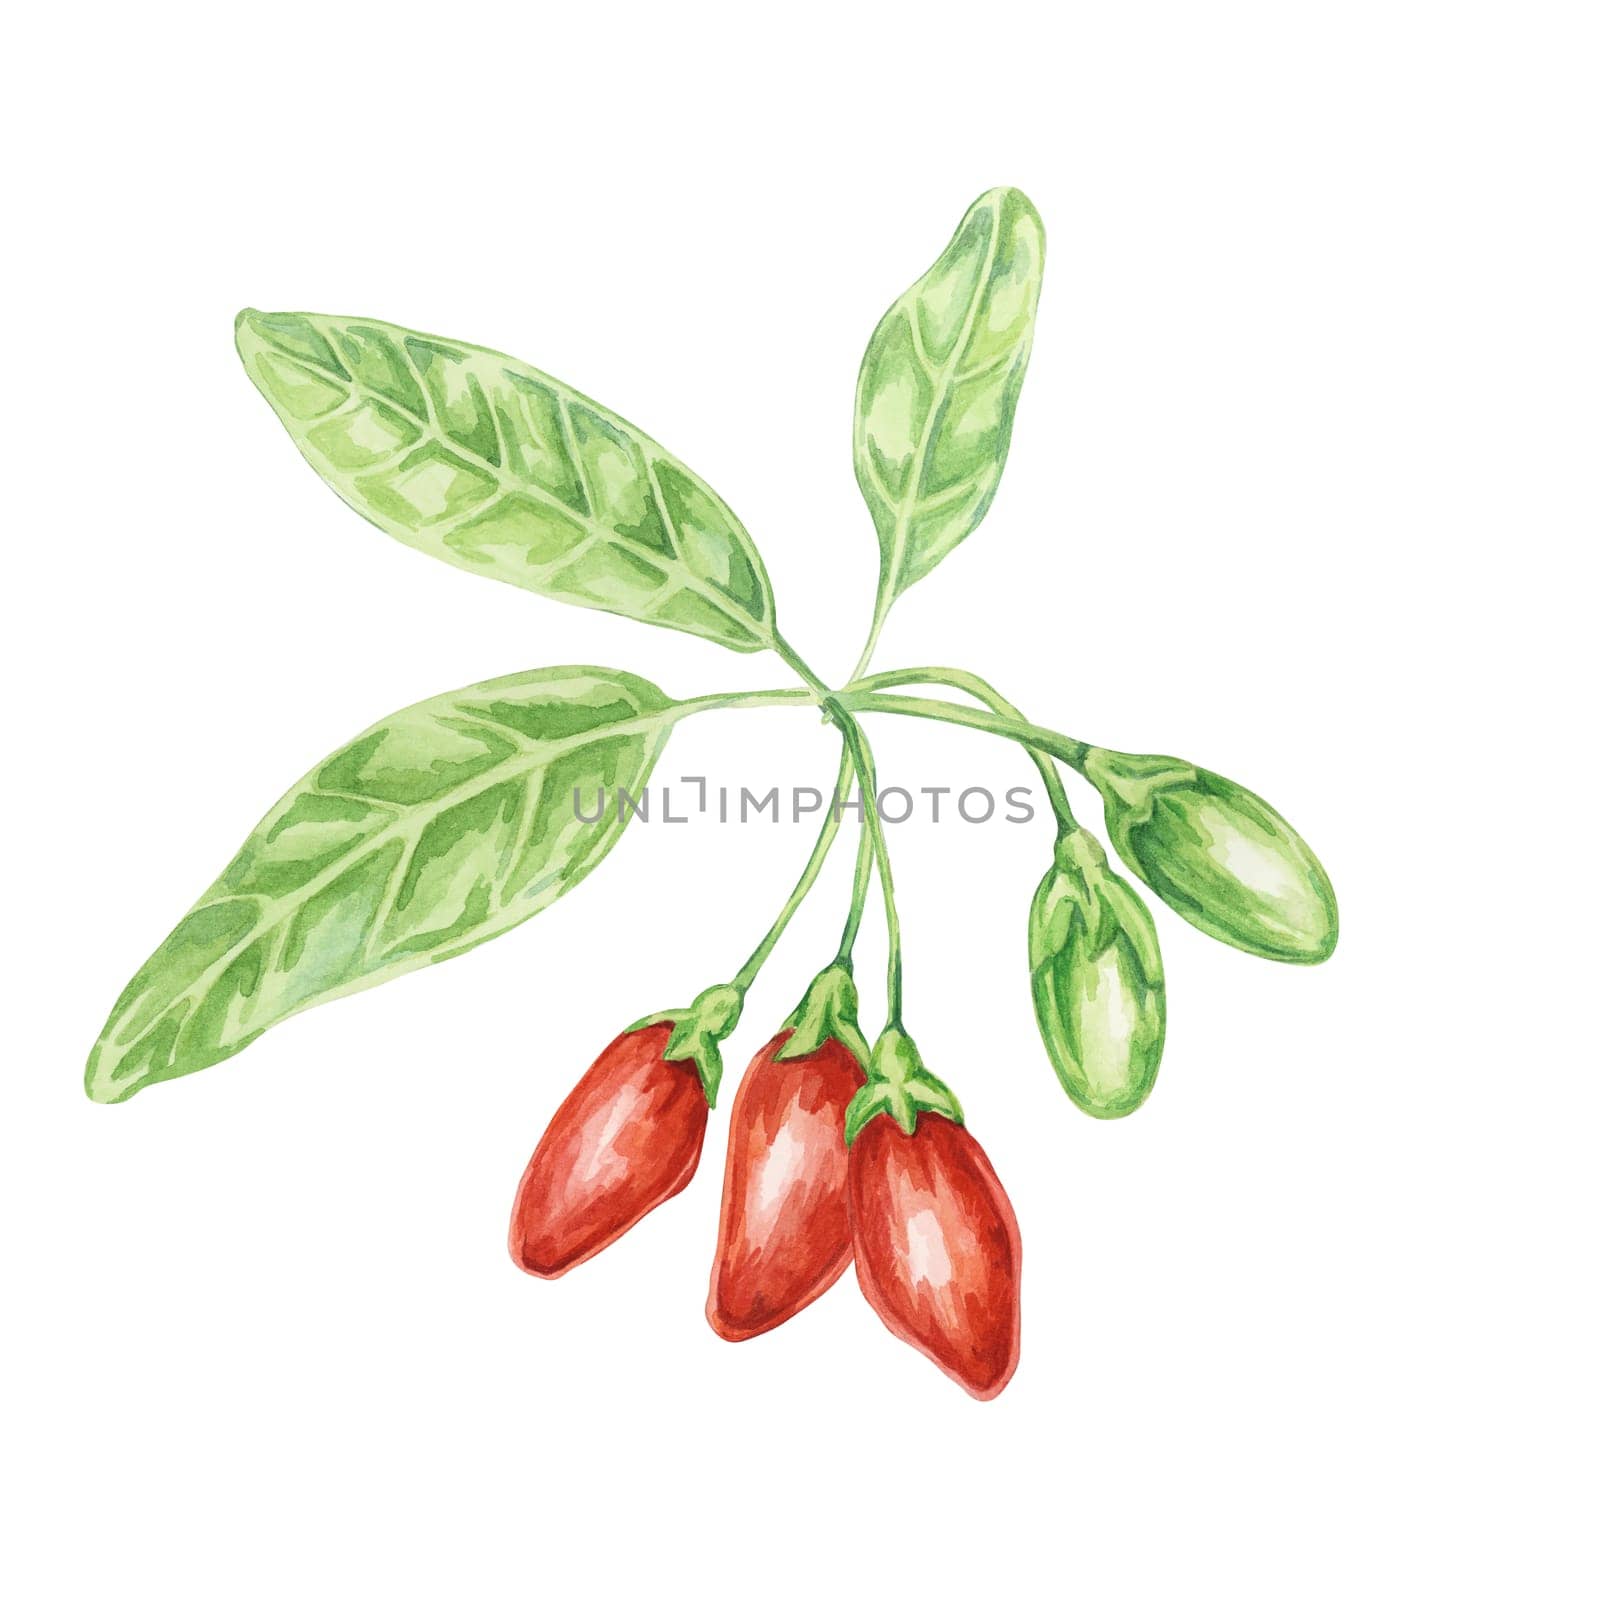 Ripe goji berries on the branch with leaves in watercolor isolated on white background. Hand-drawn clipart of licium barbarum fruits, leaves. Design for printing, packaging, cards, posters